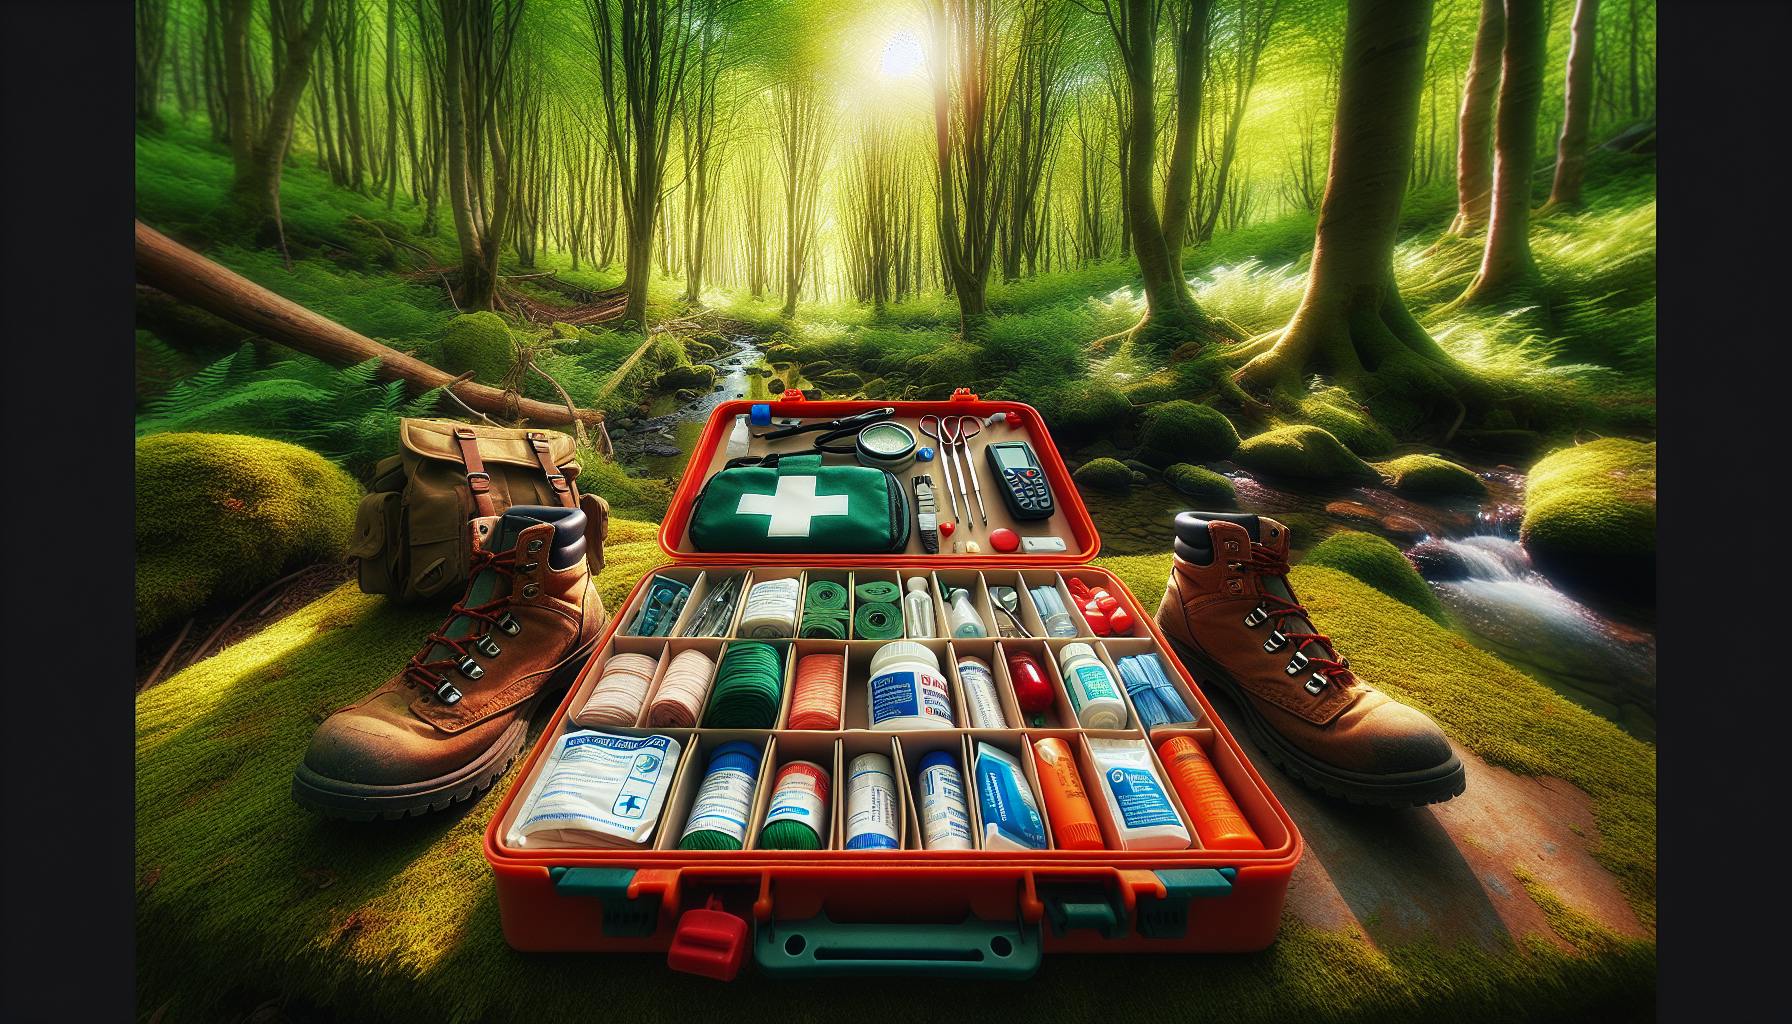 Surviveware First Aid Kit for Outdoor Adventures